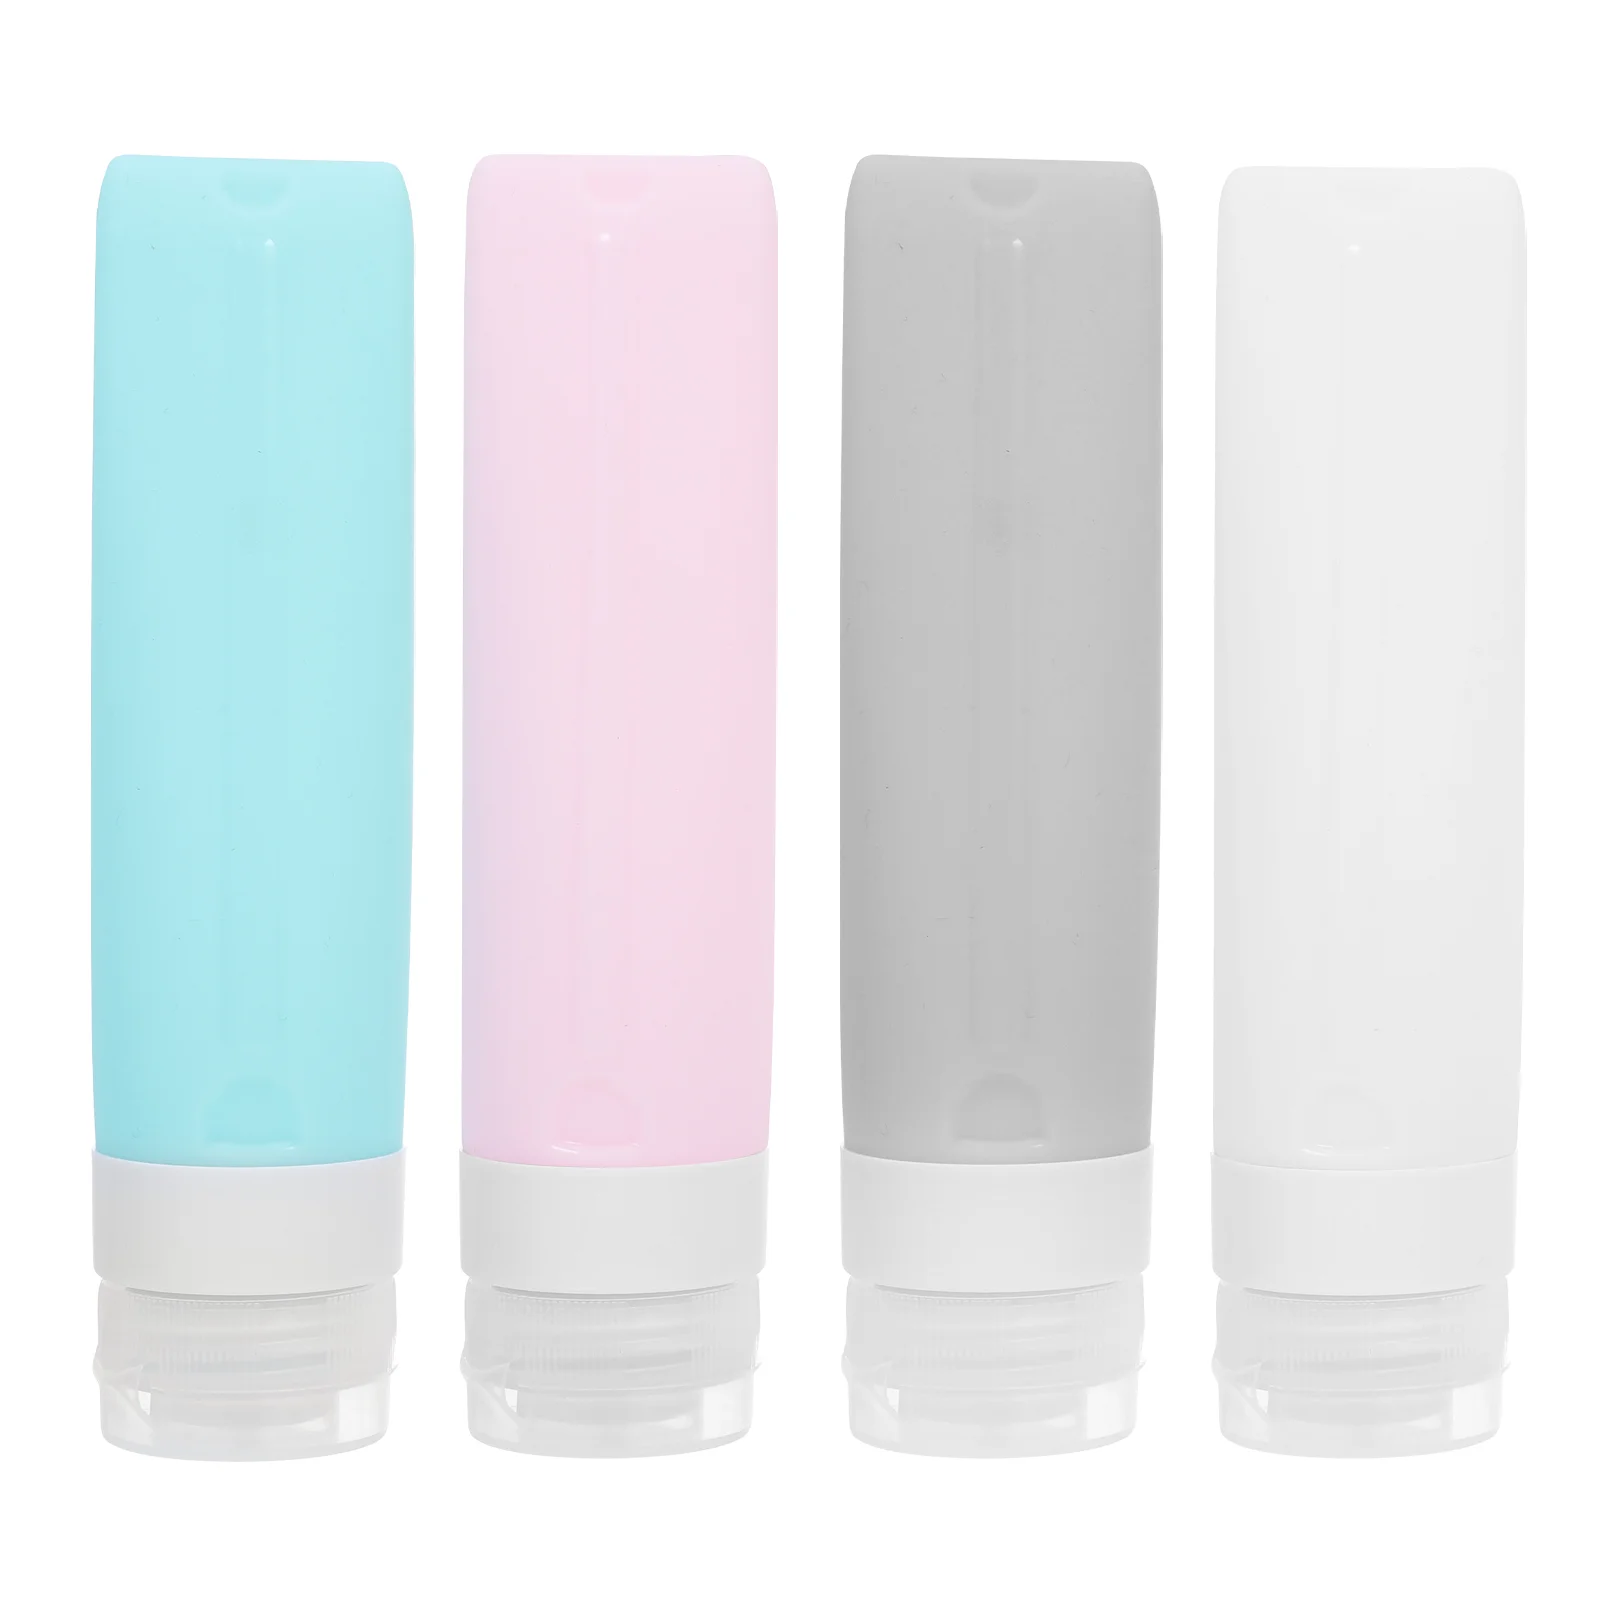 

4pcs Travel Squeeze Bottles Silicone Lotion Dispenser Refillable Toiletry Containers for Shampoo ( Assorted Color )